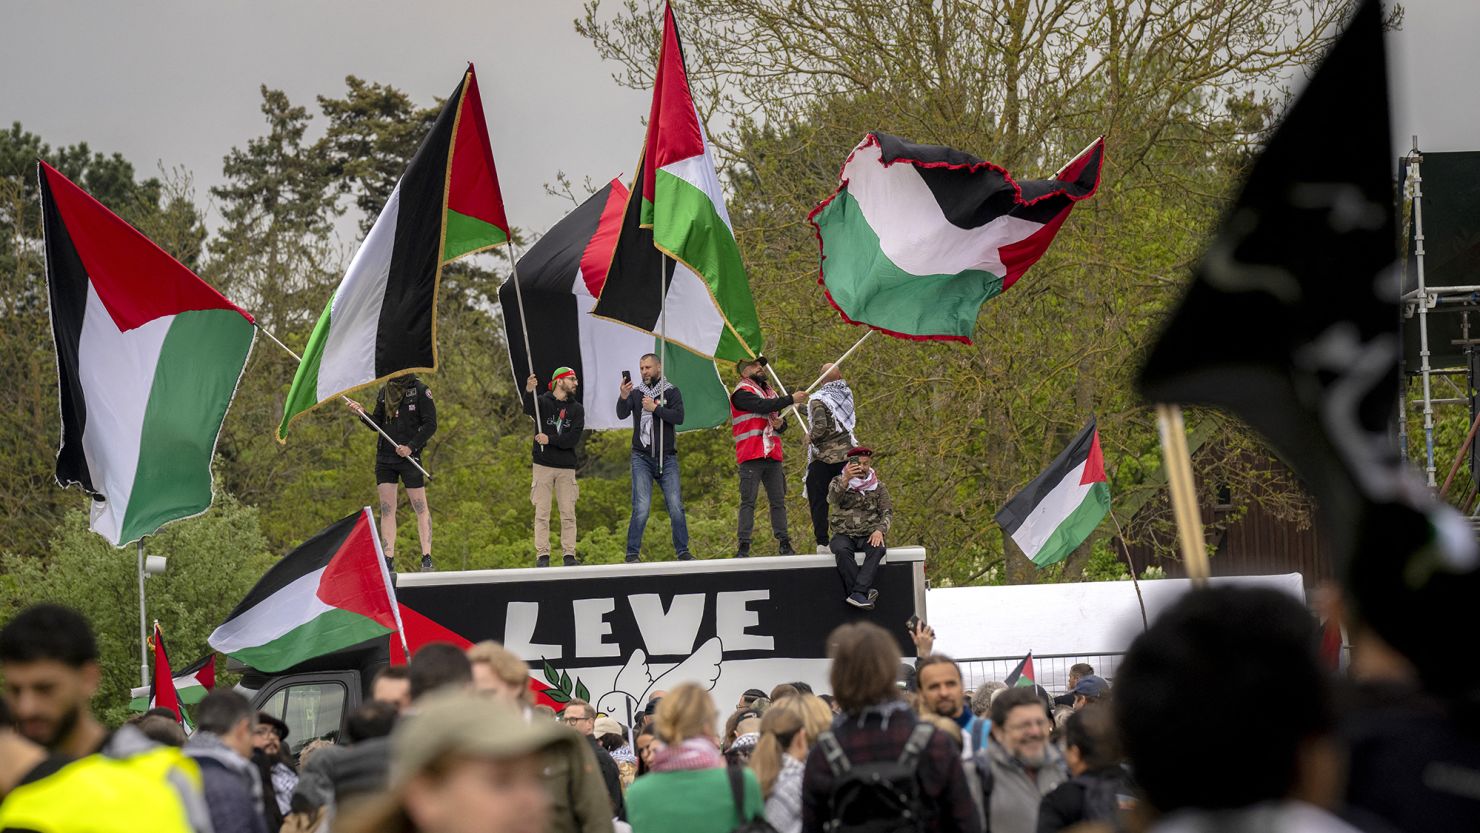 Pro-Palestinian demonstrators protest against Israel's involvement at Eurovision on Thursday.